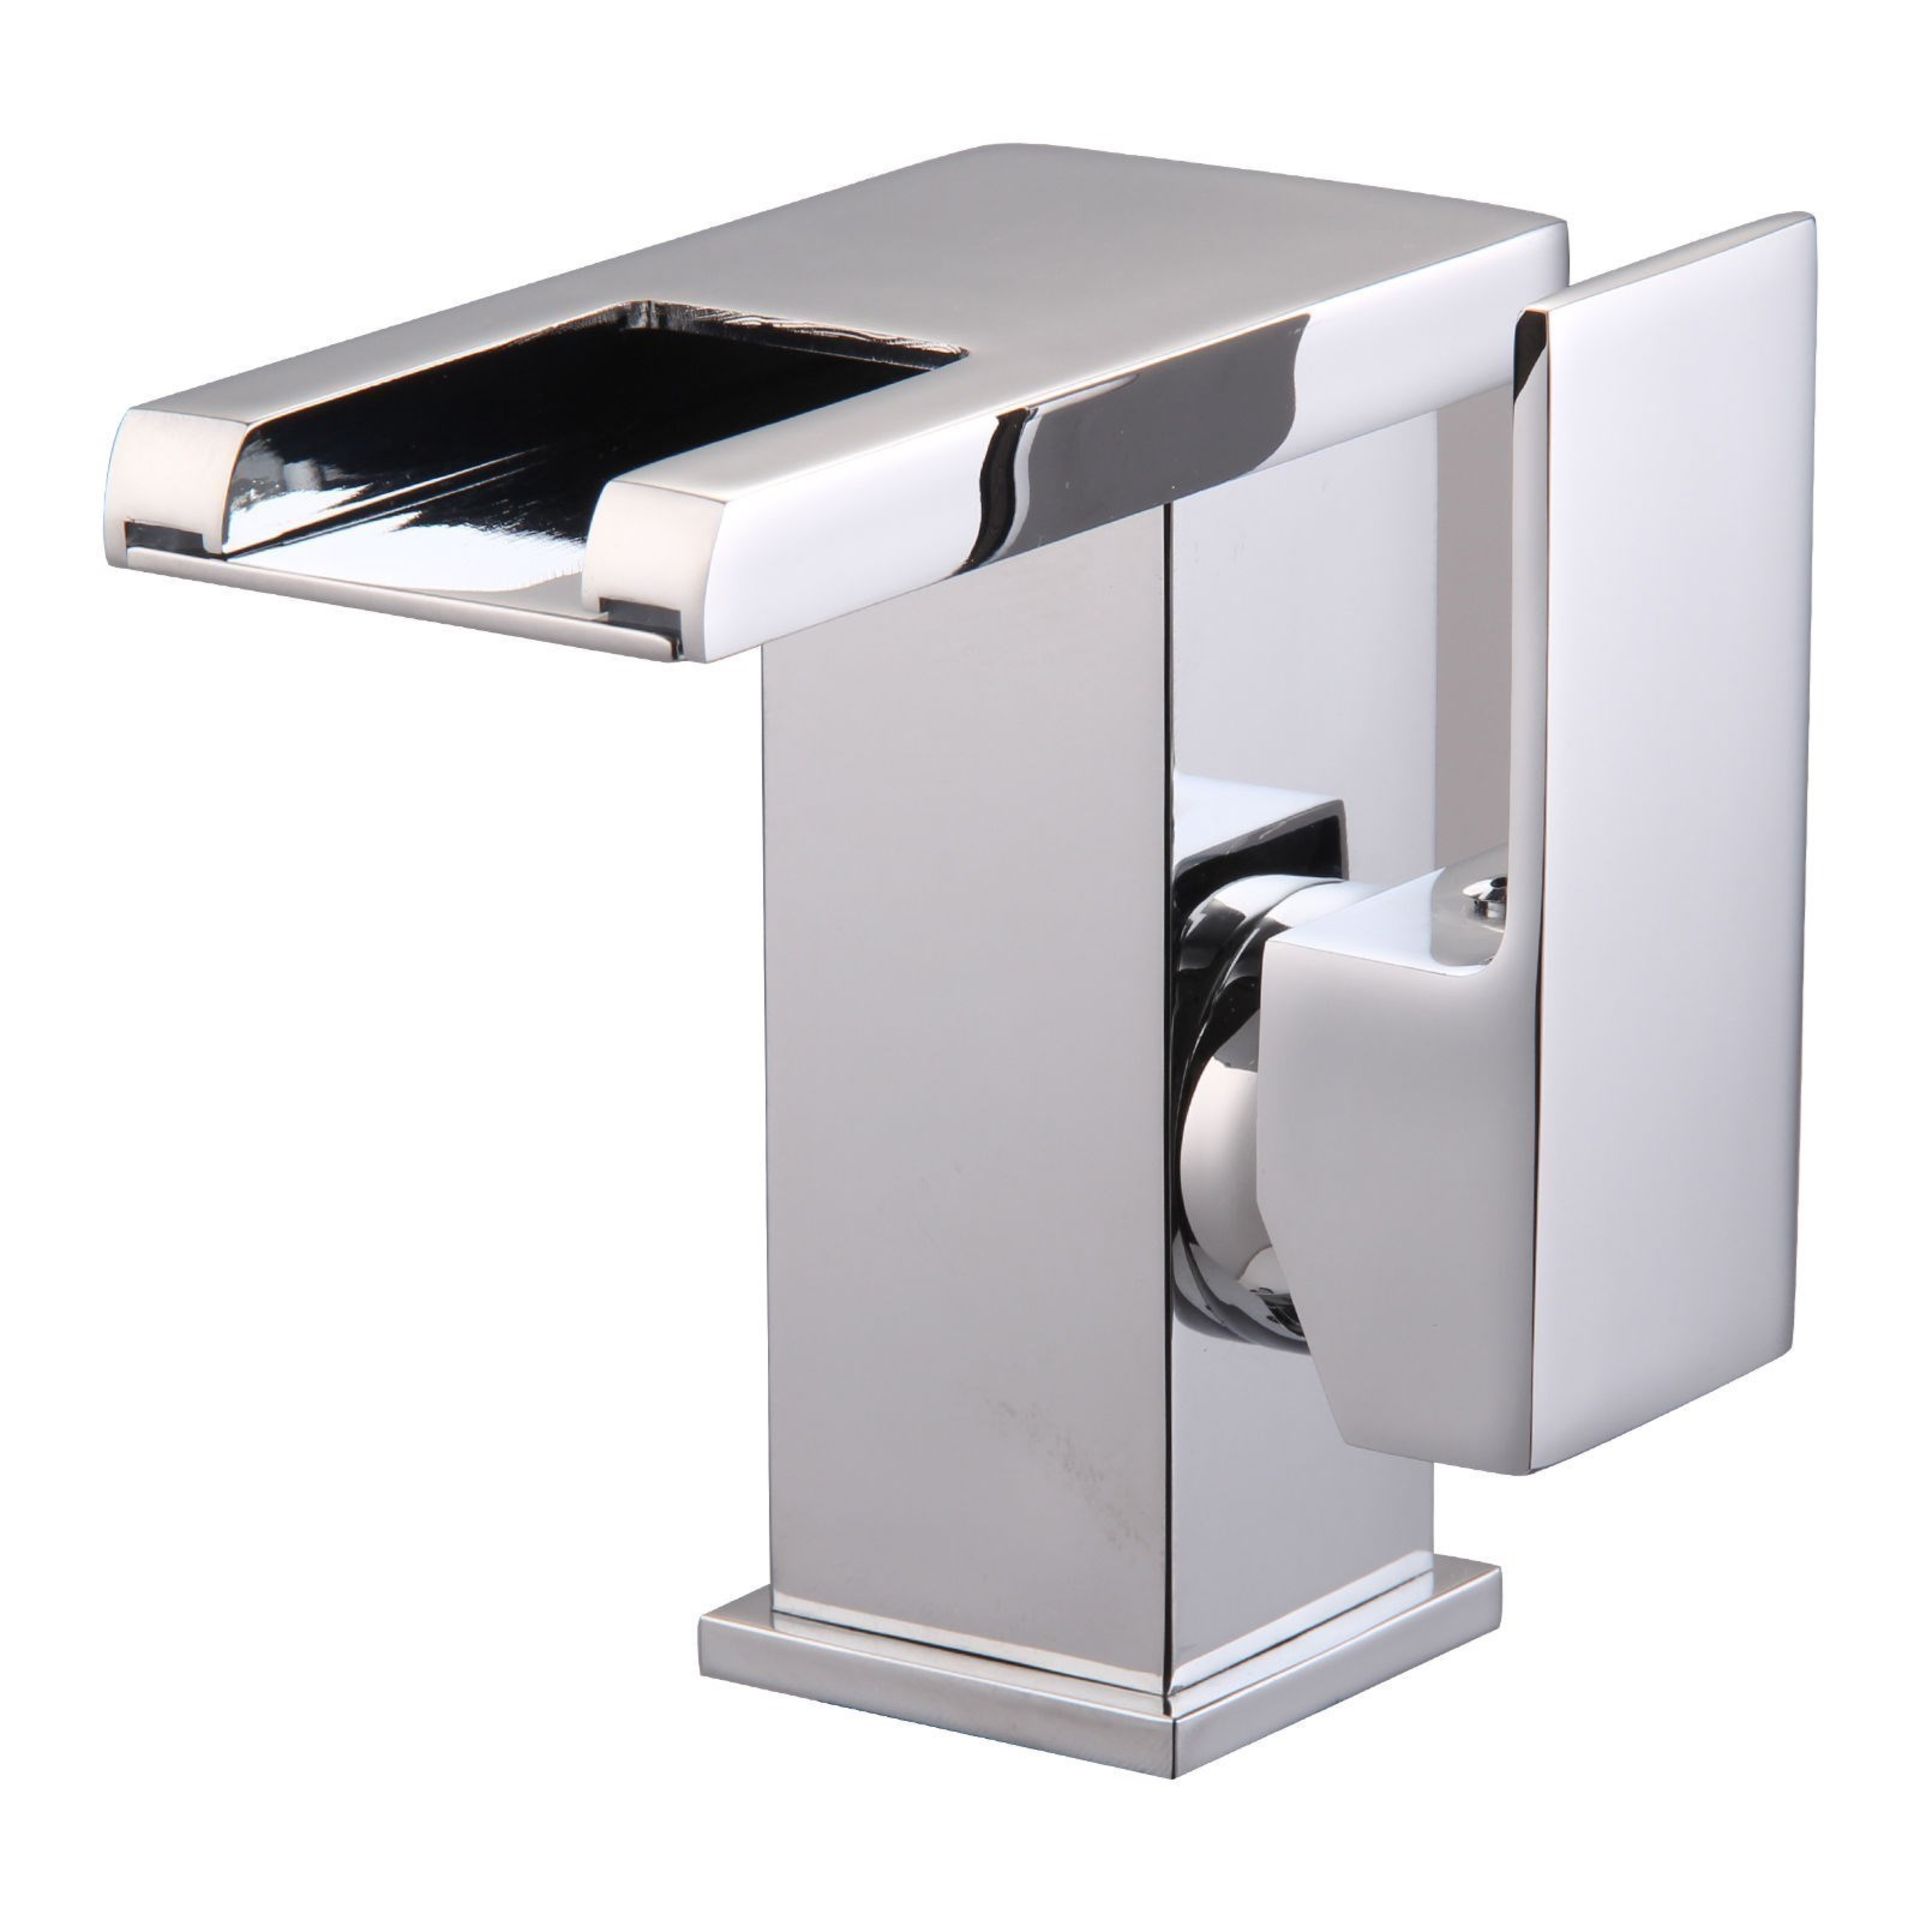 LED Waterfall Bathroom Basin Mixer Tap. RRP £229.99.Easy to install and clean. All copper mo... - Image 3 of 3